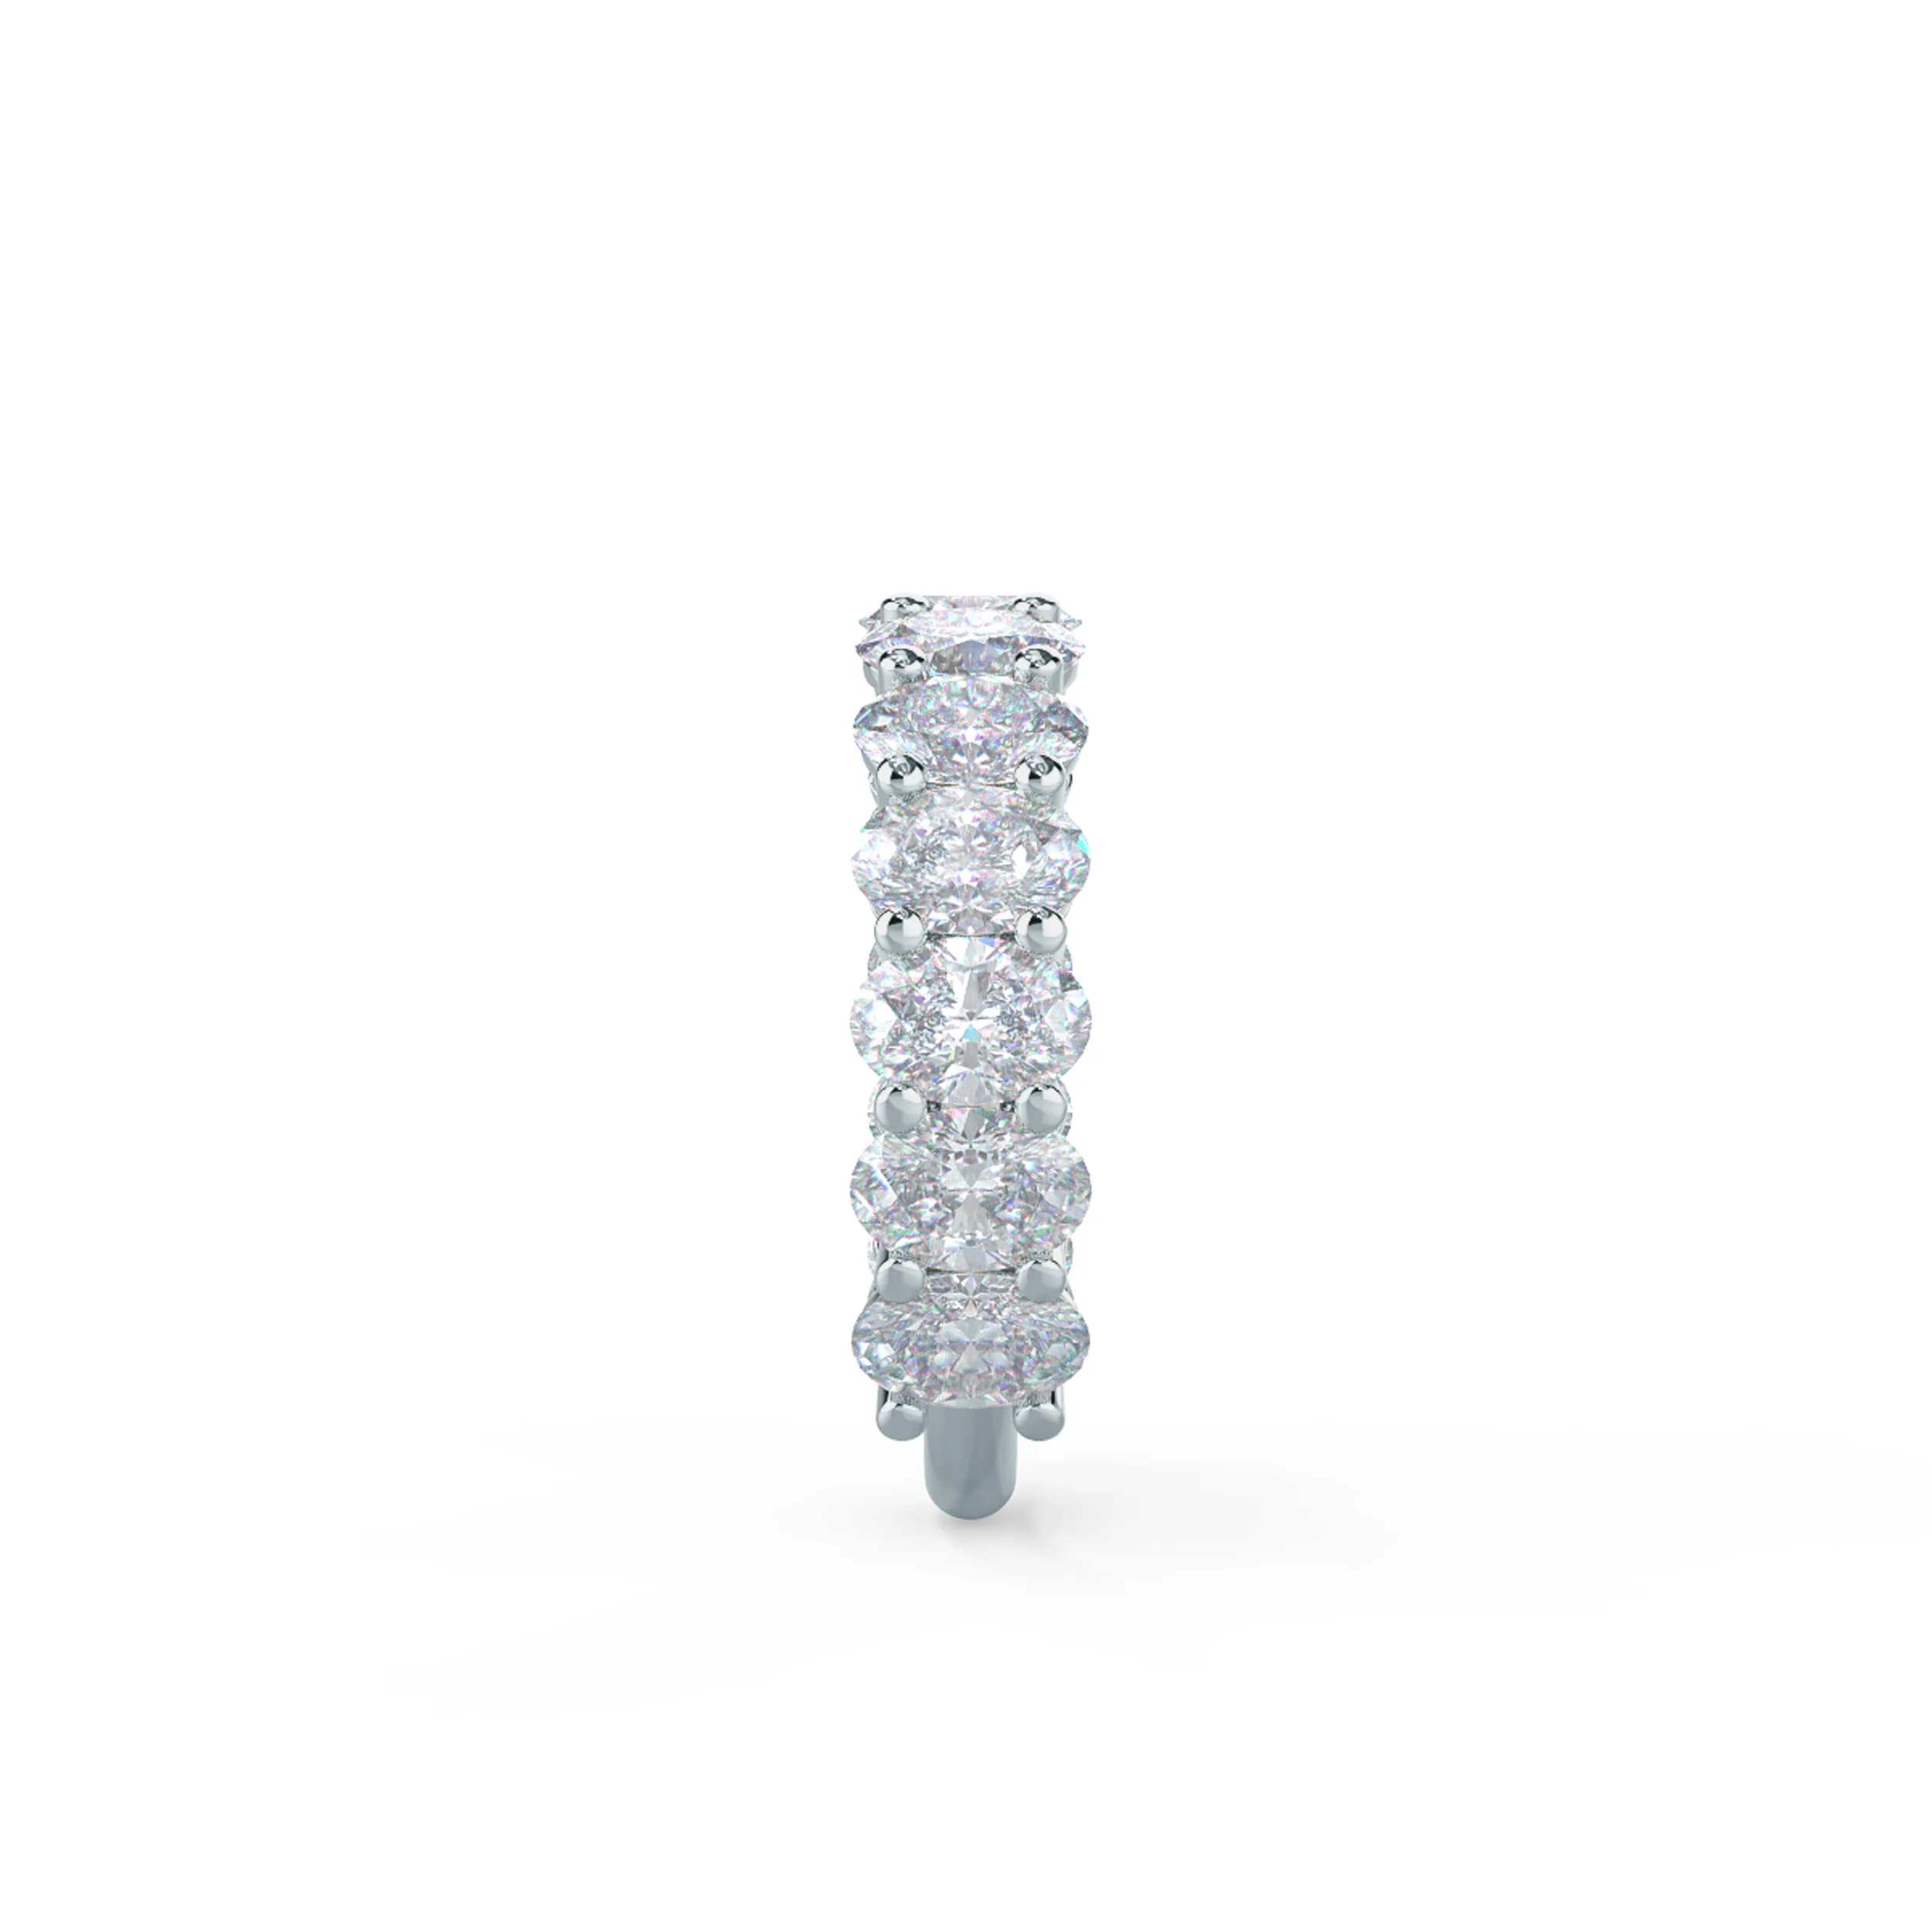 18k White Gold Oval Basket Three Quarter Band featuring 4.0 Carat Lab Diamonds (Side View)